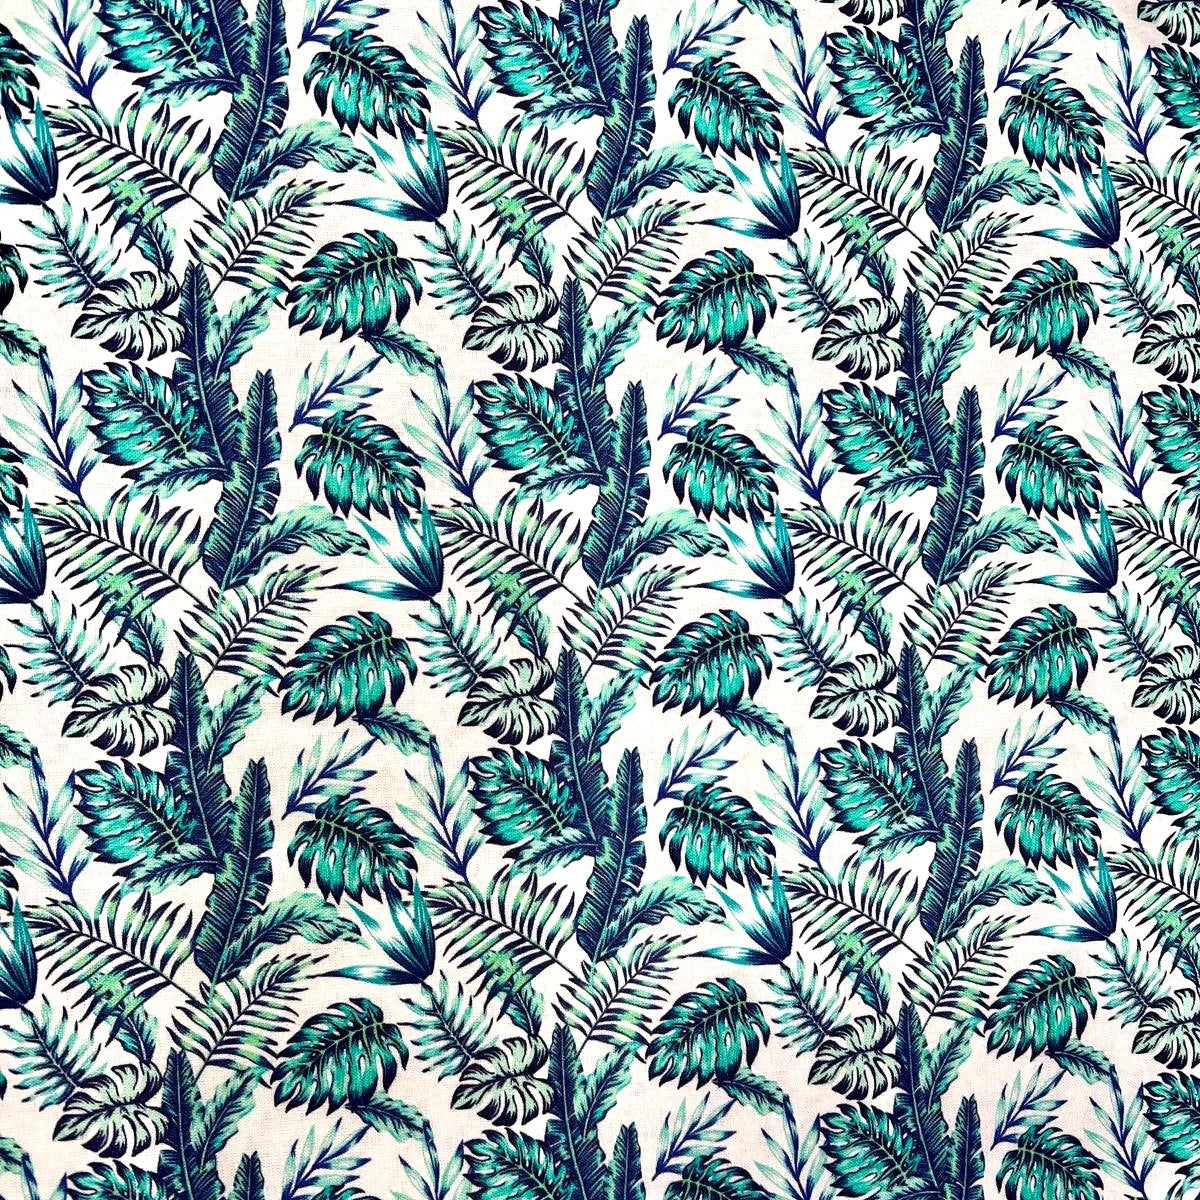 Per Metre Digitally Printed 100% Cotton- 45" Wide (Green/blue feathers)